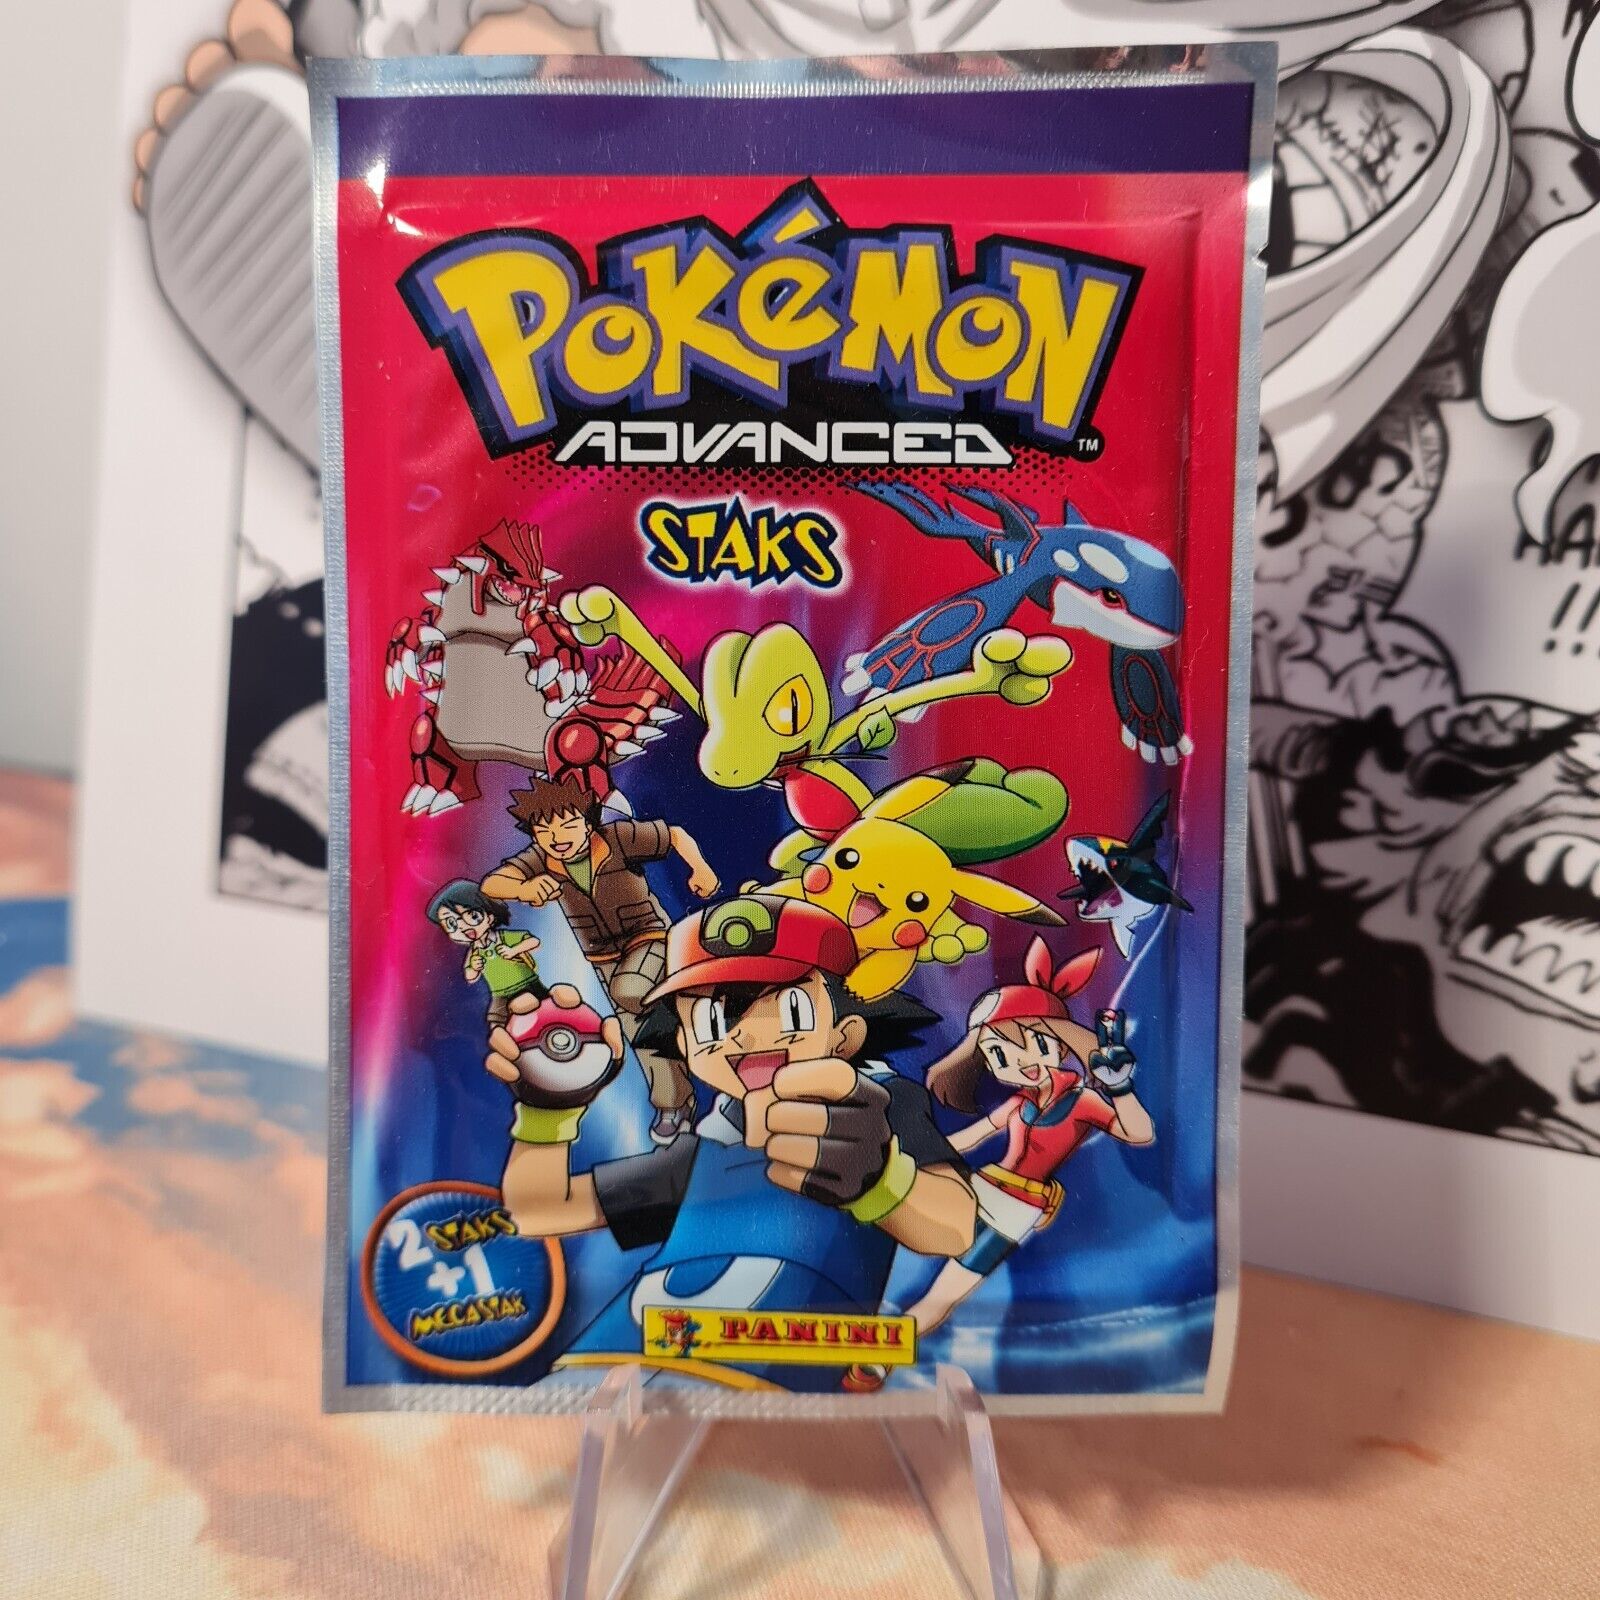 Pokemon Advanced Staks Booster Sealed - Rare, Original and New